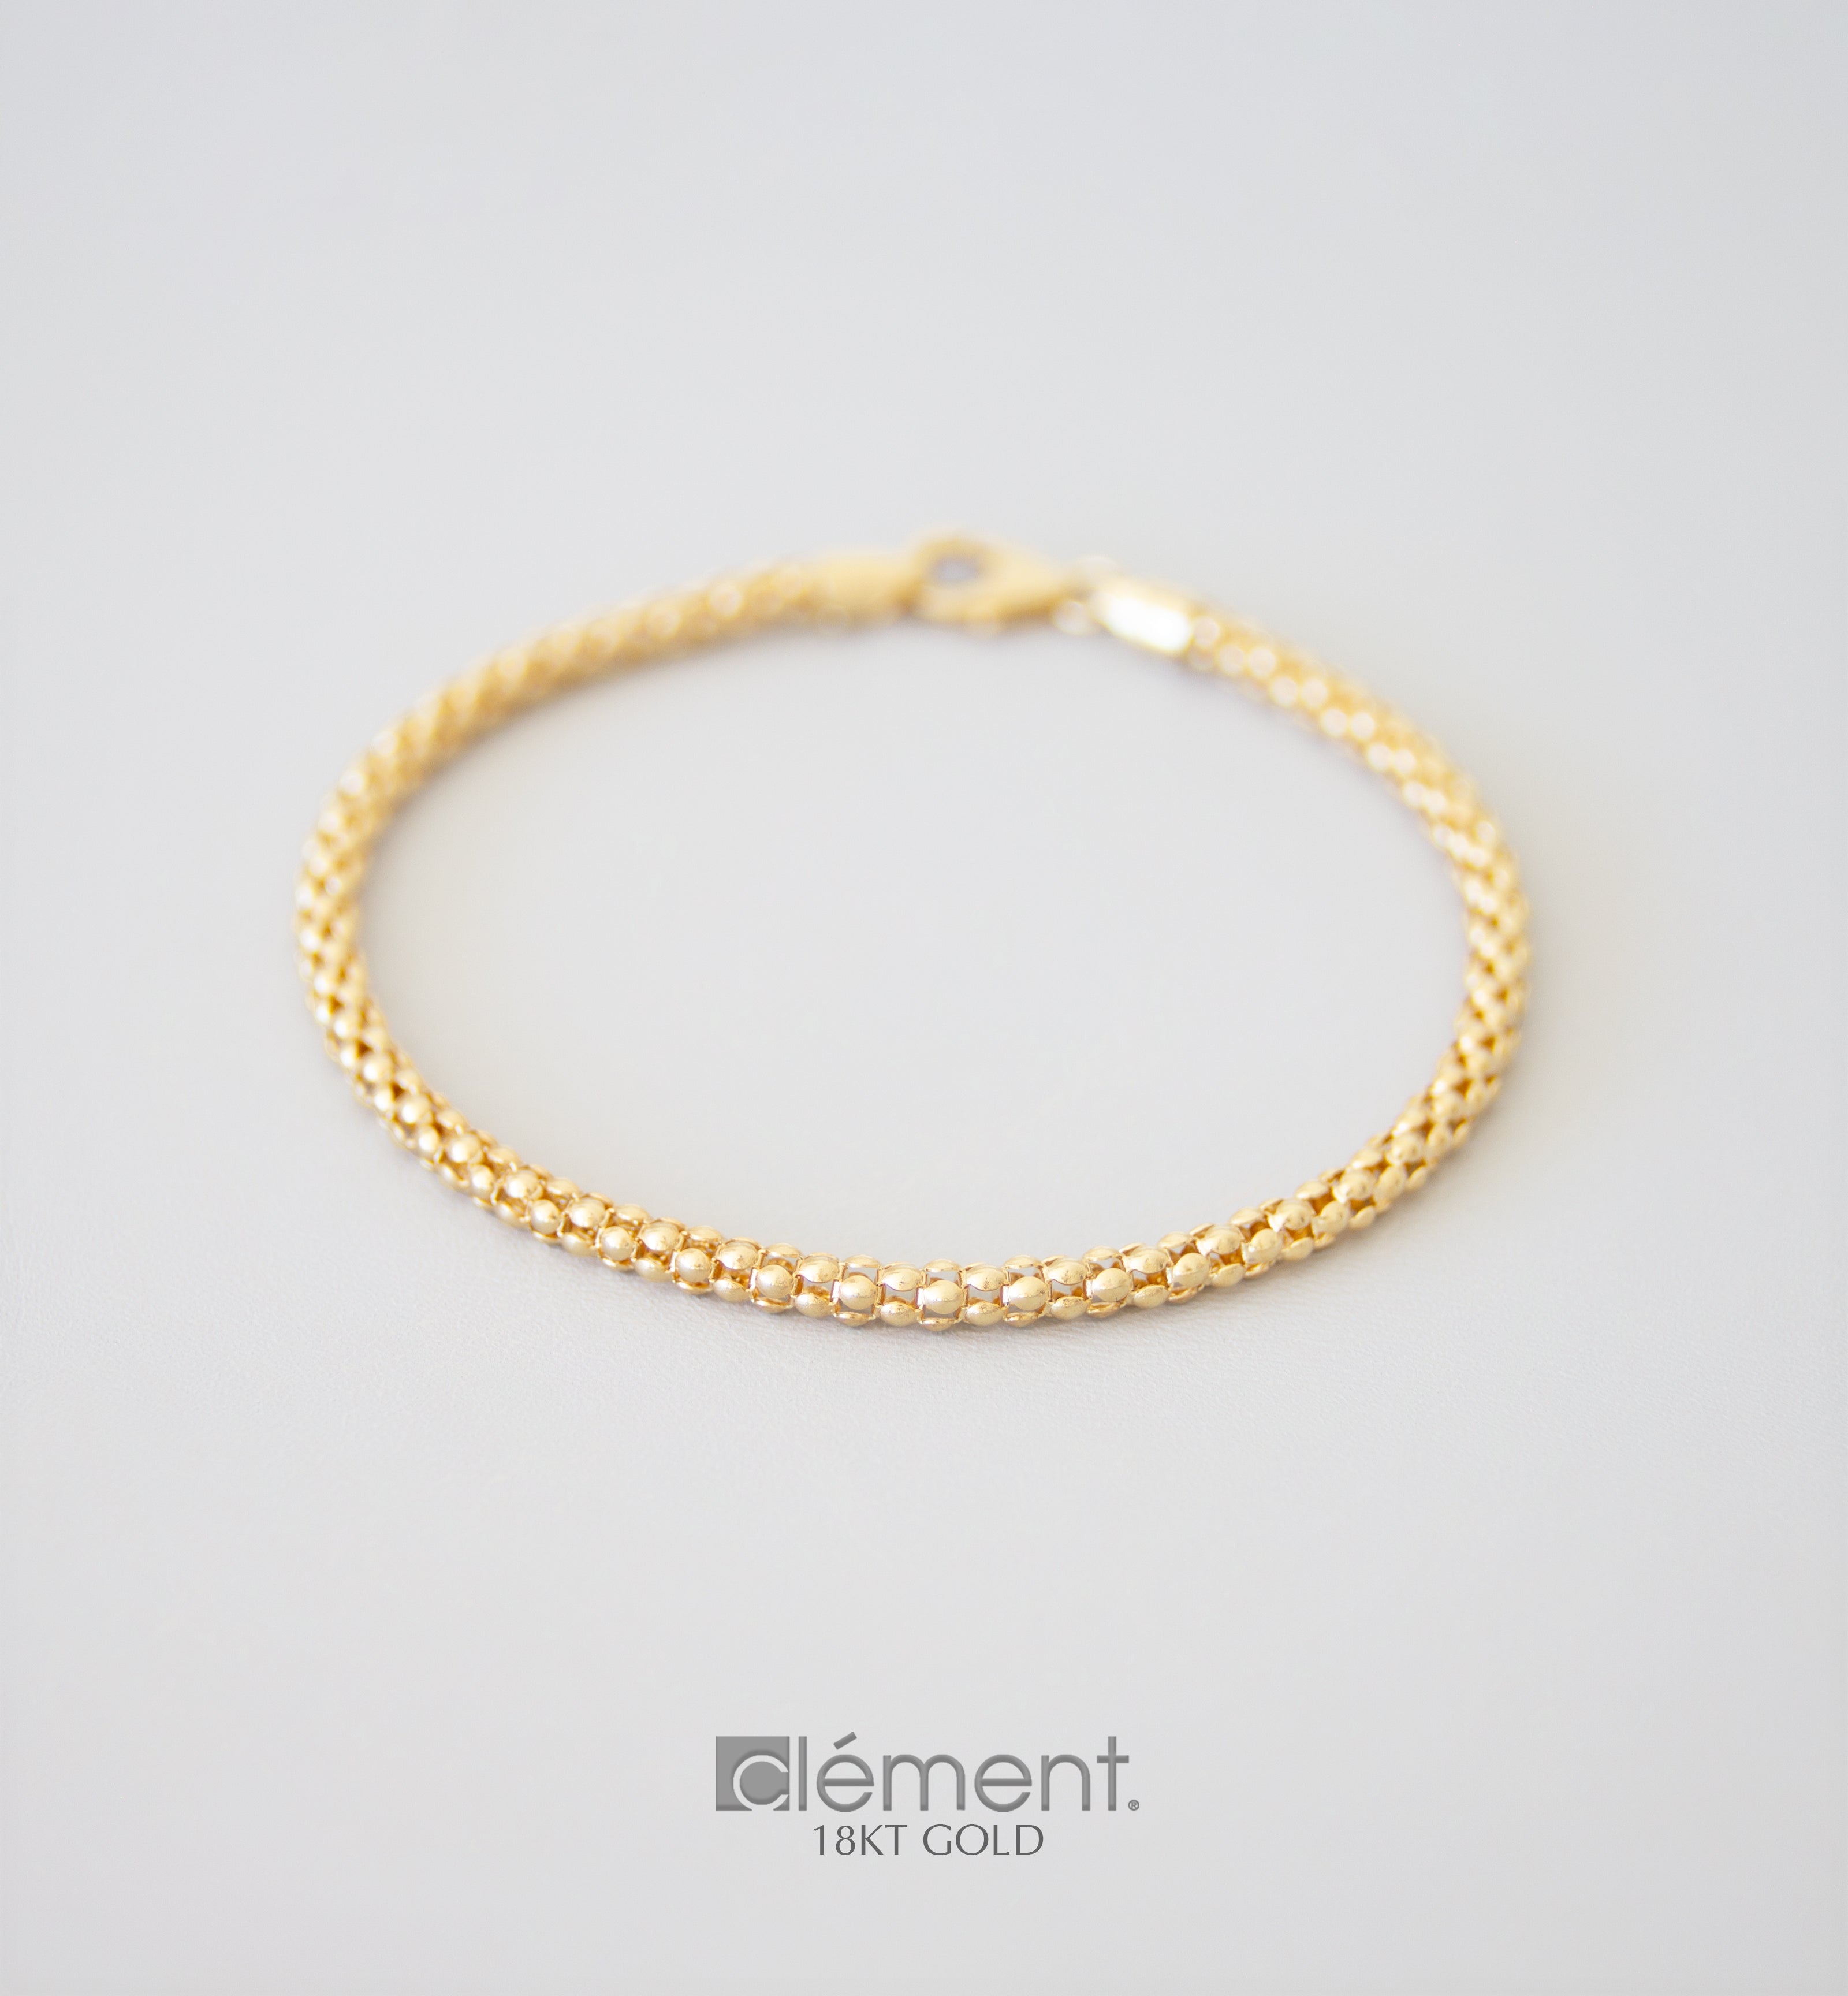 A Vintage 18ct Gold Chain Link Bracelet with Rope-Like Texture | Hancocks  London